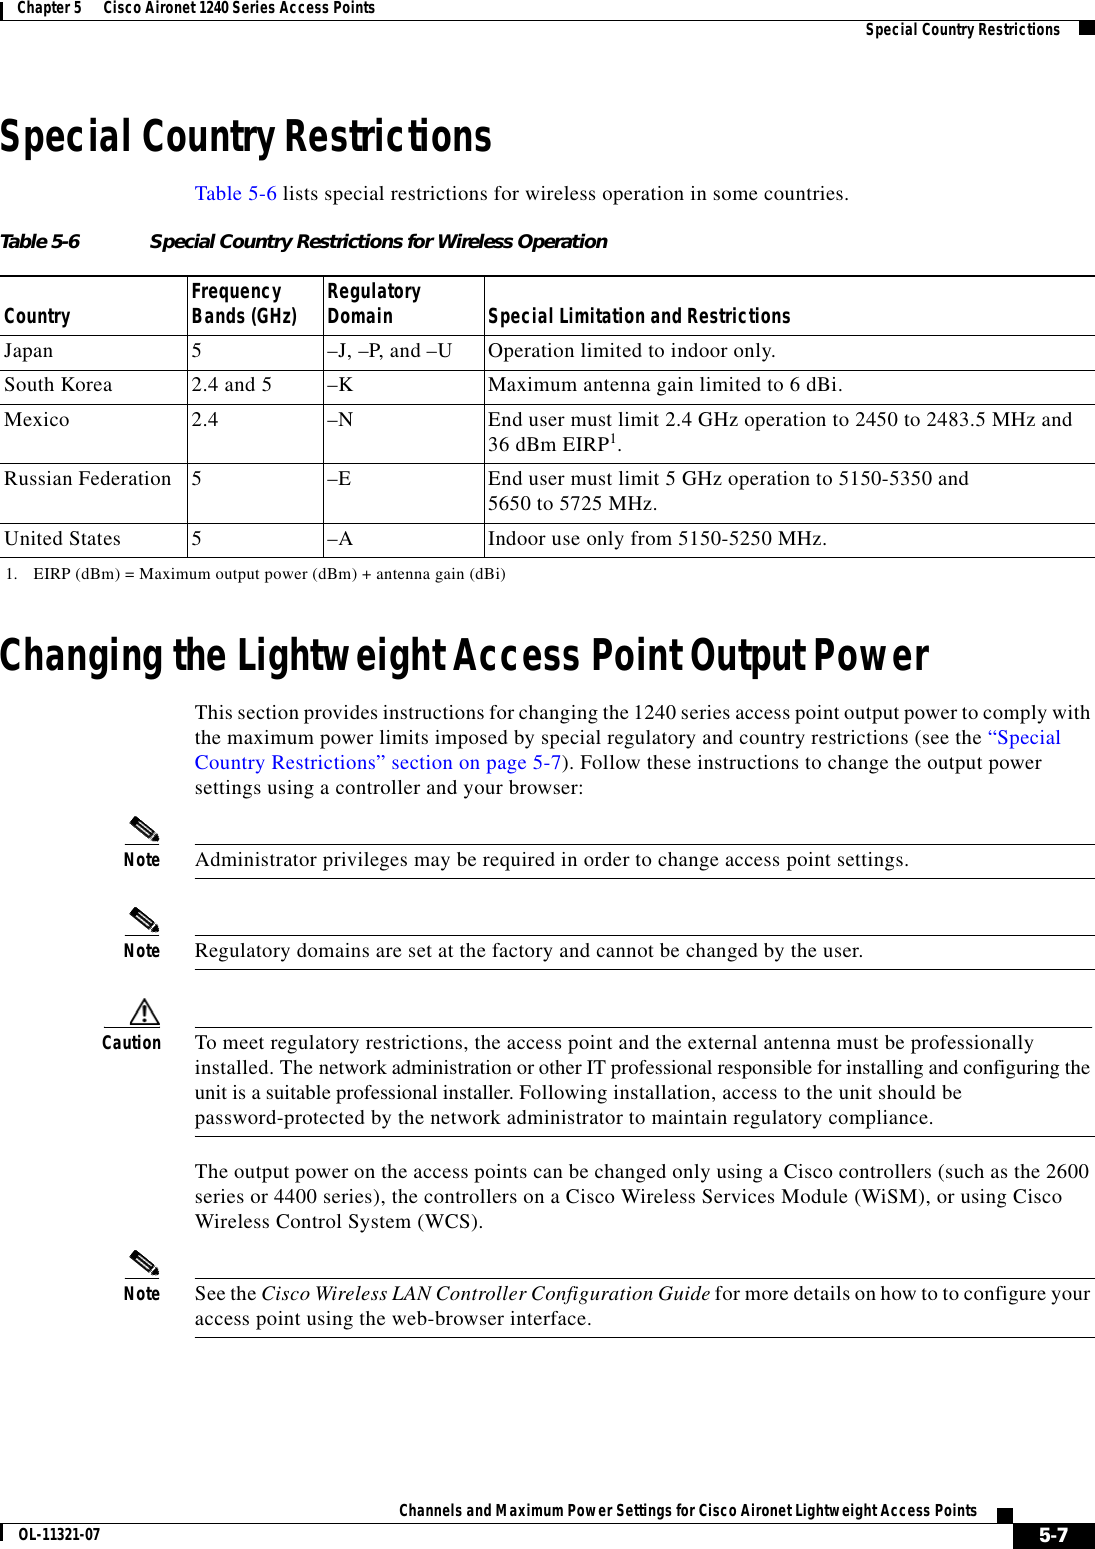  5-7Channels and Maximum Power Settings for Cisco Aironet Lightweight Access PointsOL-11321-07Chapter 5      Cisco Aironet 1240 Series Access Points   Special Country RestrictionsSpecial Country RestrictionsTable 5-6 lists special restrictions for wireless operation in some countries. Changing the Lightweight Access Point Output PowerThis section provides instructions for changing the 1240 series access point output power to comply with the maximum power limits imposed by special regulatory and country restrictions (see the “Special Country Restrictions” section on page 5-7). Follow these instructions to change the output power settings using a controller and your browser:Note Administrator privileges may be required in order to change access point settings.Note Regulatory domains are set at the factory and cannot be changed by the user.Caution To meet regulatory restrictions, the access point and the external antenna must be professionally installed. The network administration or other IT professional responsible for installing and configuring the unit is a suitable professional installer. Following installation, access to the unit should be  password-protected by the network administrator to maintain regulatory compliance.The output power on the access points can be changed only using a Cisco controllers (such as the 2600 series or 4400 series), the controllers on a Cisco Wireless Services Module (WiSM), or using Cisco Wireless Control System (WCS). Note See the Cisco Wireless LAN Controller Configuration Guide for more details on how to to configure your access point using the web-browser interface.Table 5-6 Special Country Restrictions for Wireless OperationCountry Frequency Bands (GHz) Regulatory Domain Special Limitation and RestrictionsJapan 5–J, –P, and –U Operation limited to indoor only.South Korea 2.4 and 5  –K Maximum antenna gain limited to 6 dBi.Mexico 2.4  –N End user must limit 2.4 GHz operation to 2450 to 2483.5 MHz and  36 dBm EIRP1.1. EIRP (dBm) = Maximum output power (dBm) + antenna gain (dBi)Russian Federation 5–E End user must limit 5 GHz operation to 5150-5350 and  5650 to 5725 MHz.United States 5  –A  Indoor use only from 5150-5250 MHz.